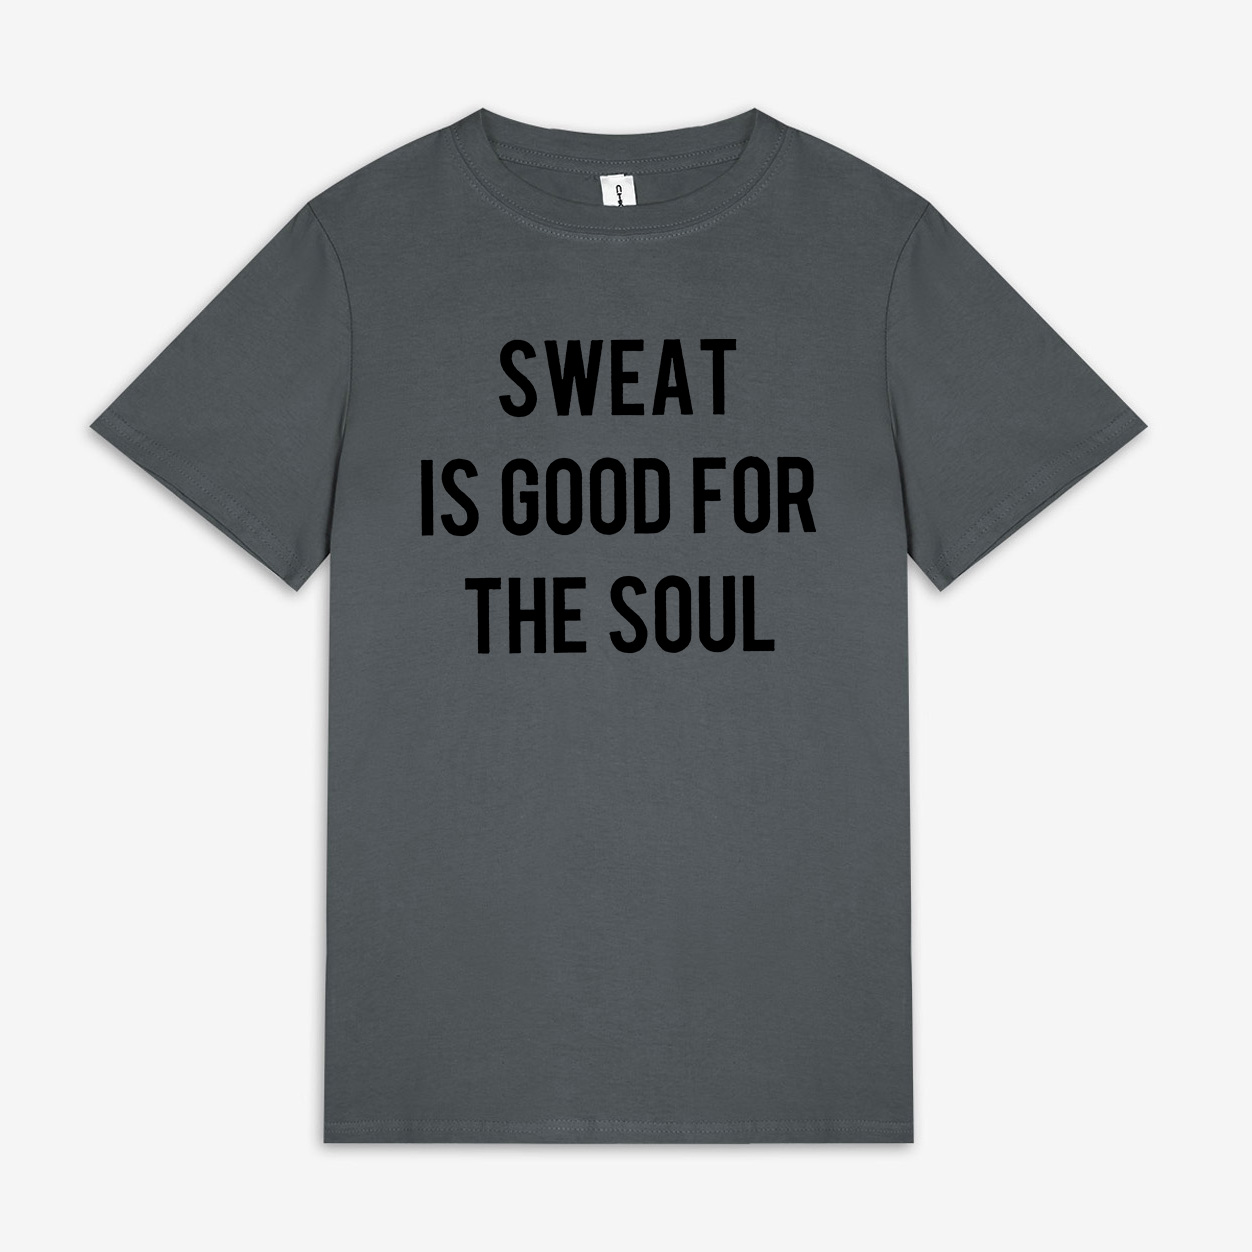 Sweat Is Good For The Soul Printed Women's T-shirt